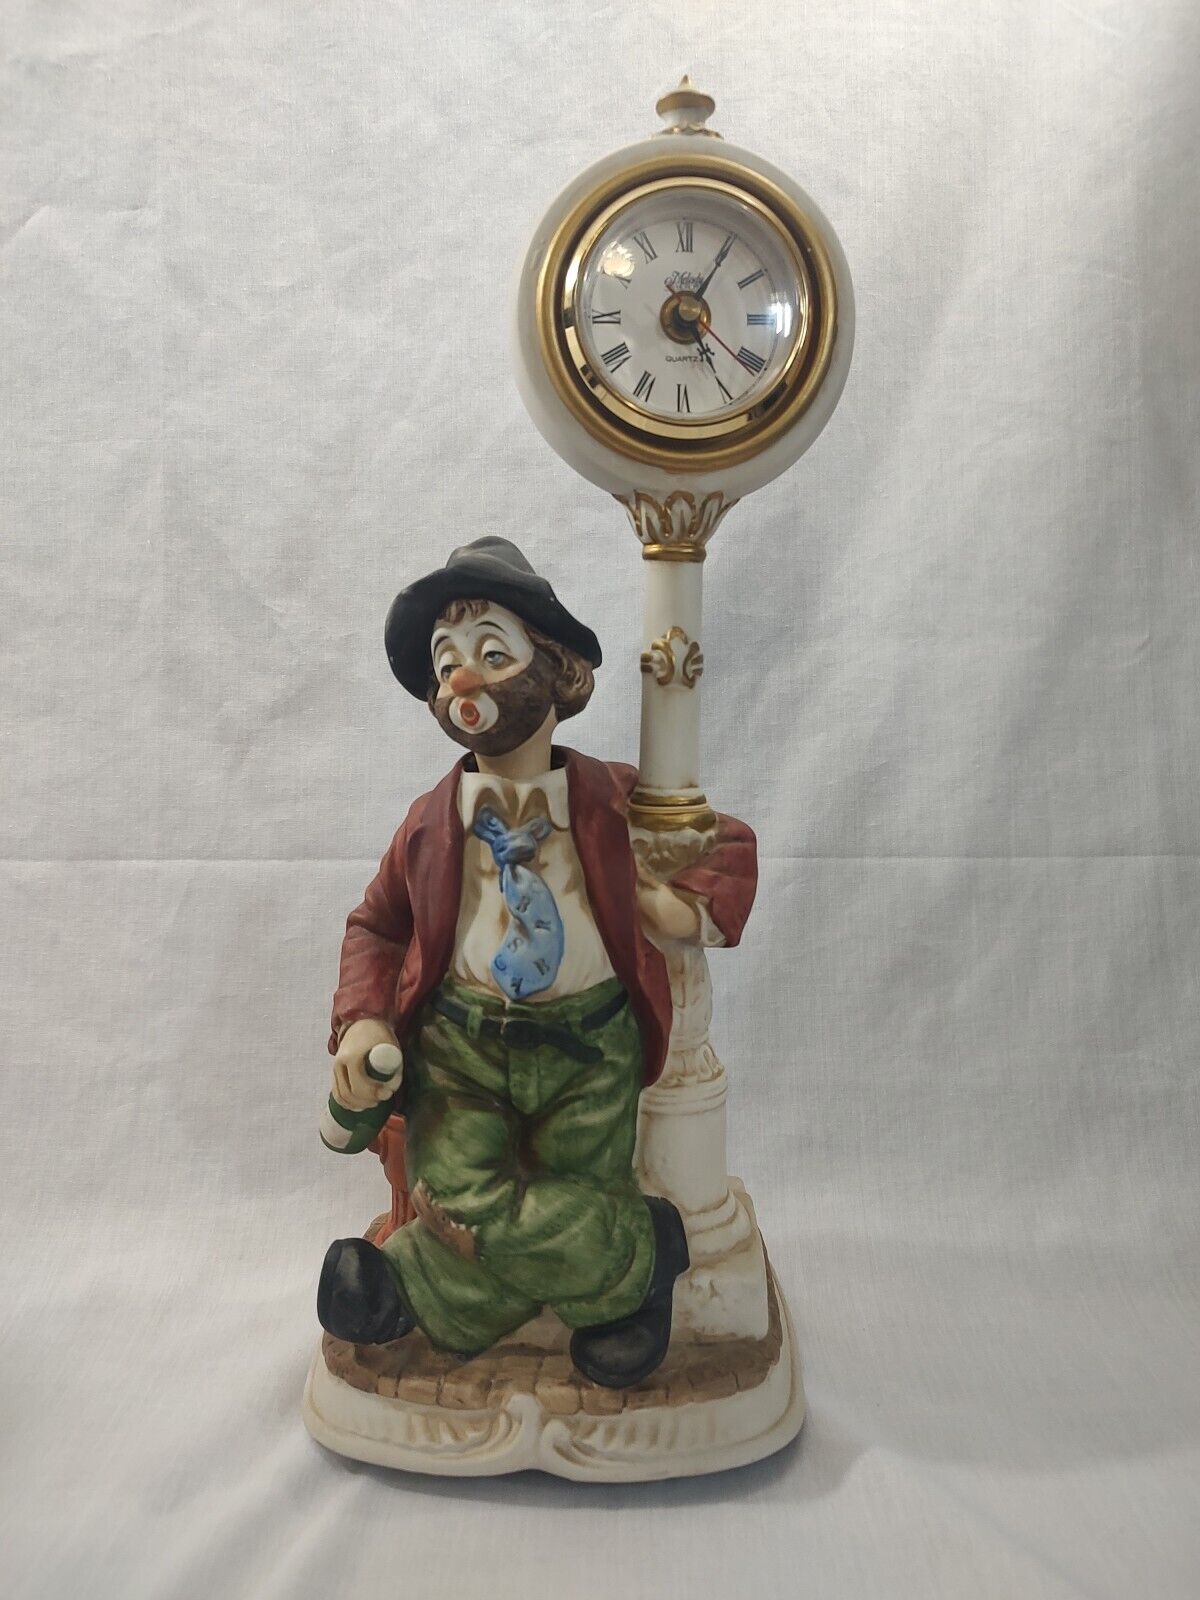 WORKING VIDEO Melody In Motion Clock Post Willie Whistling Clown Clock Porcelain